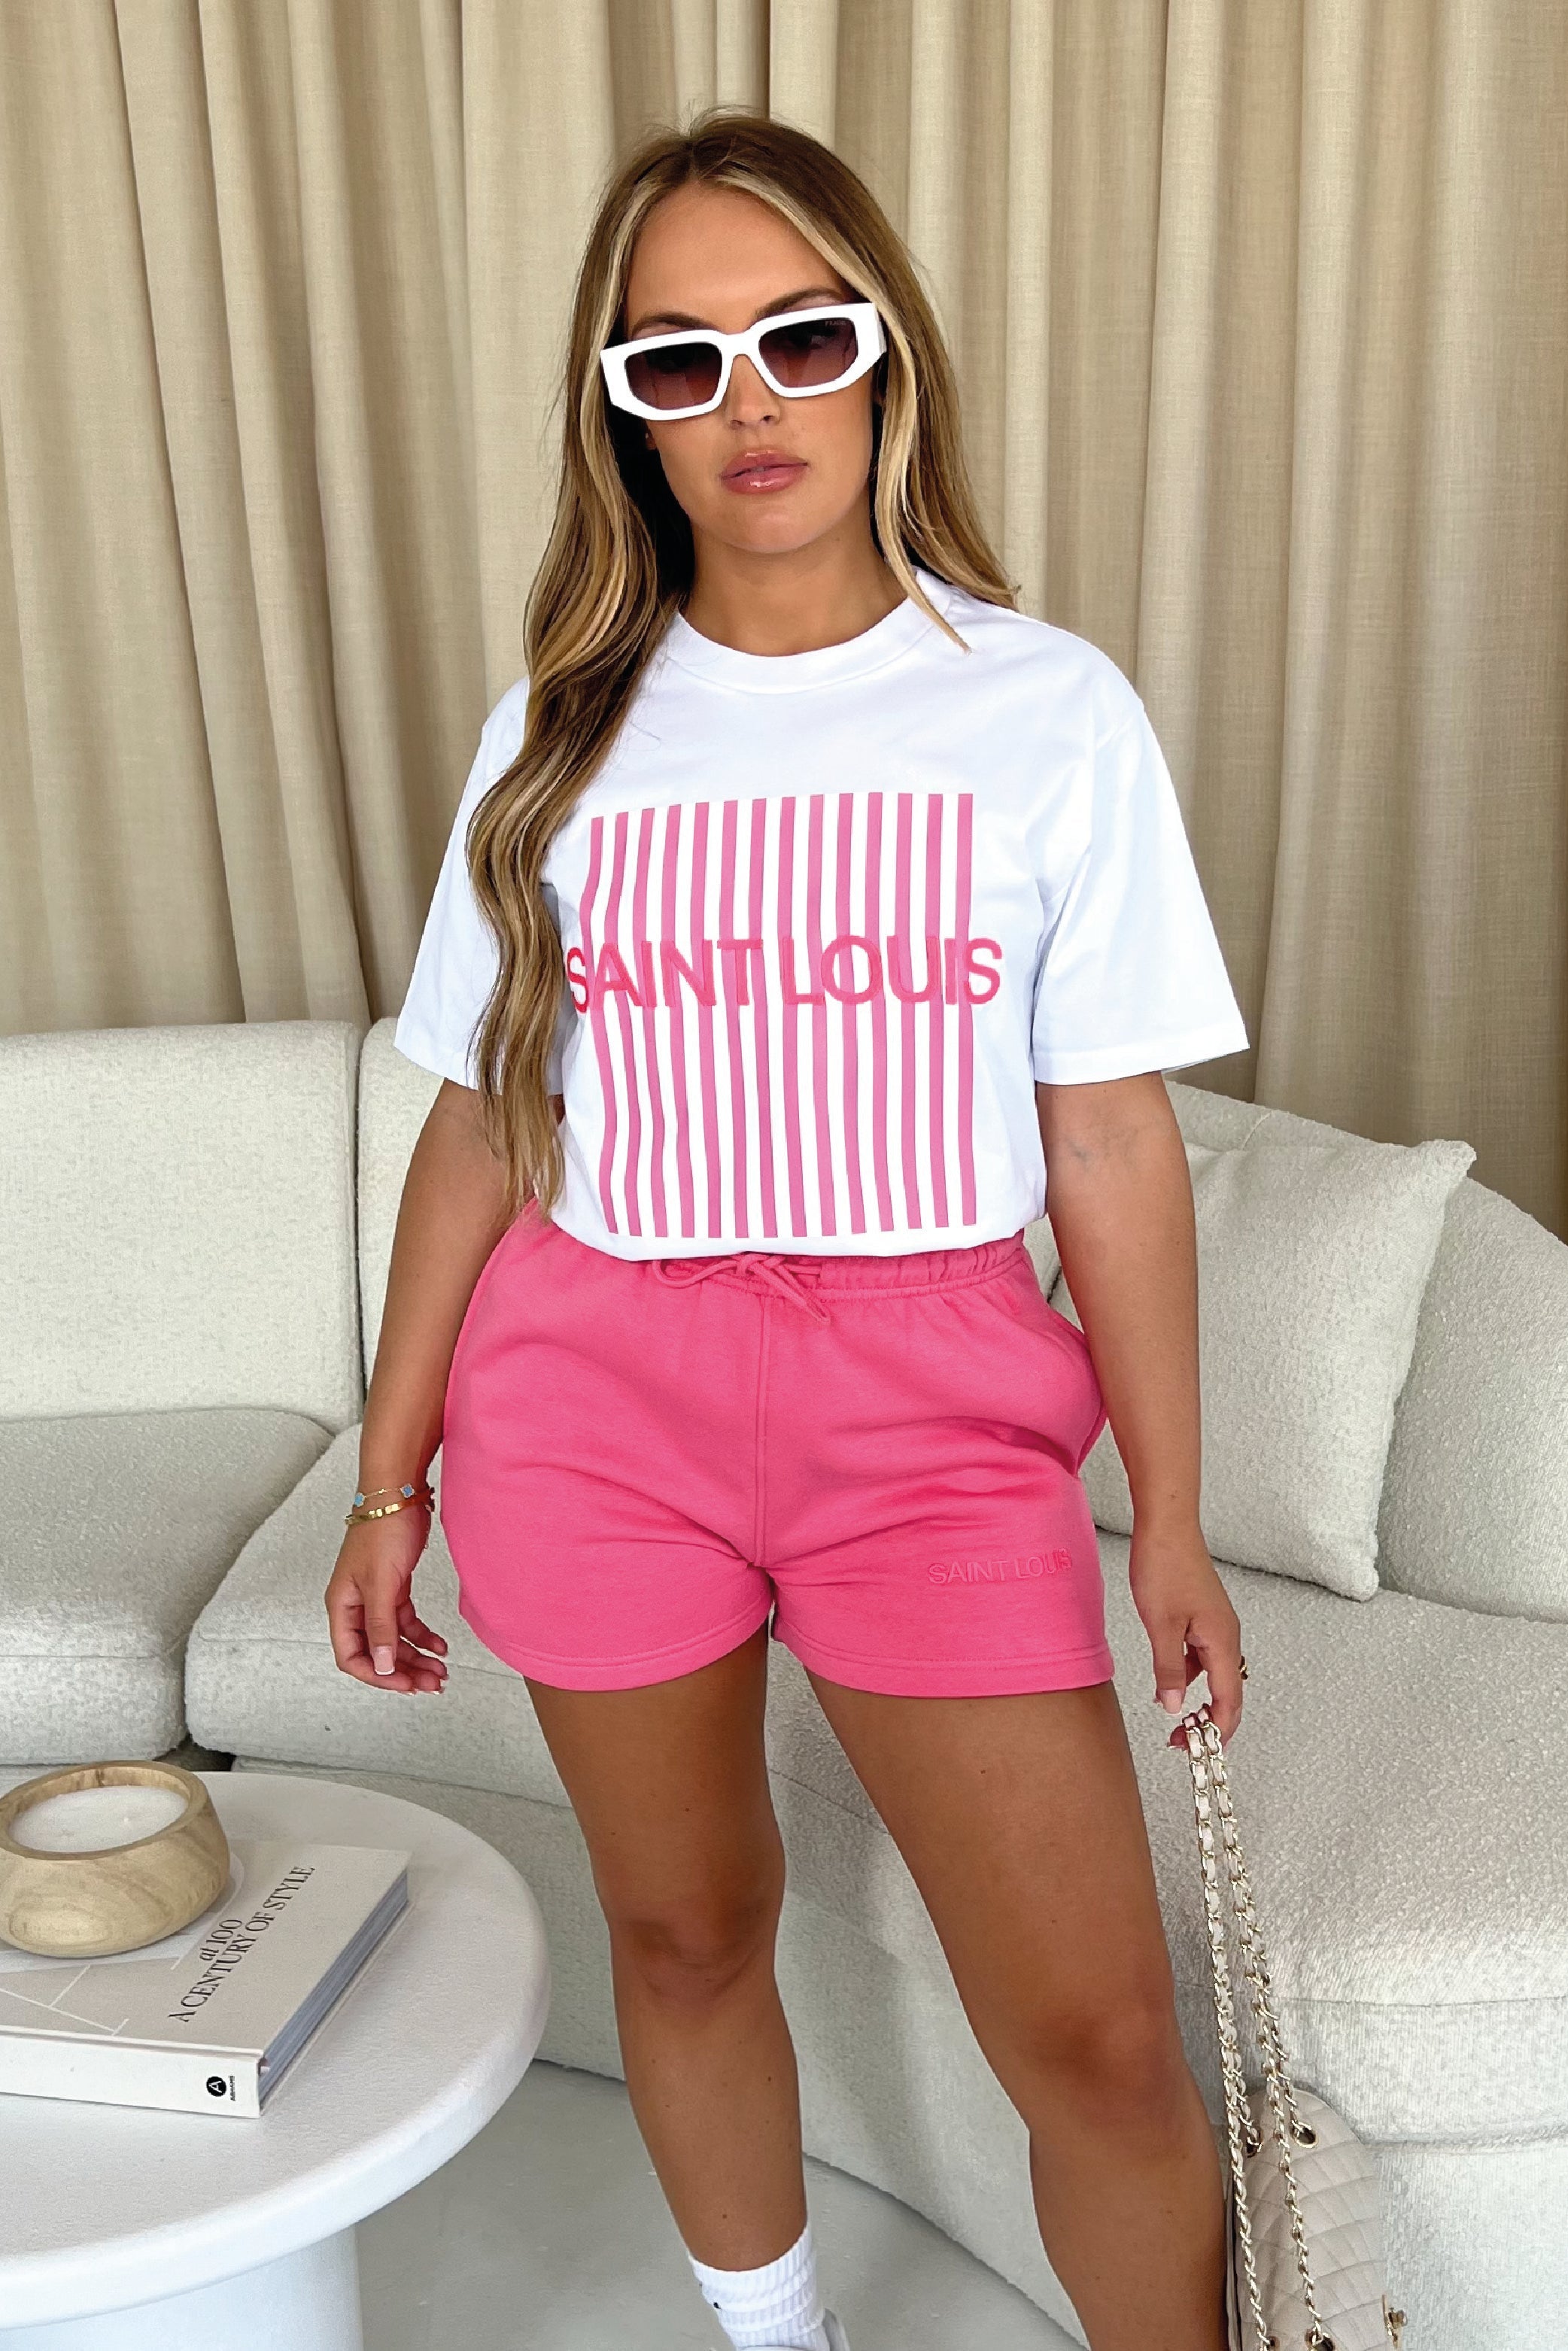 Saint Louis Pink & white embroidered premium short tee coord